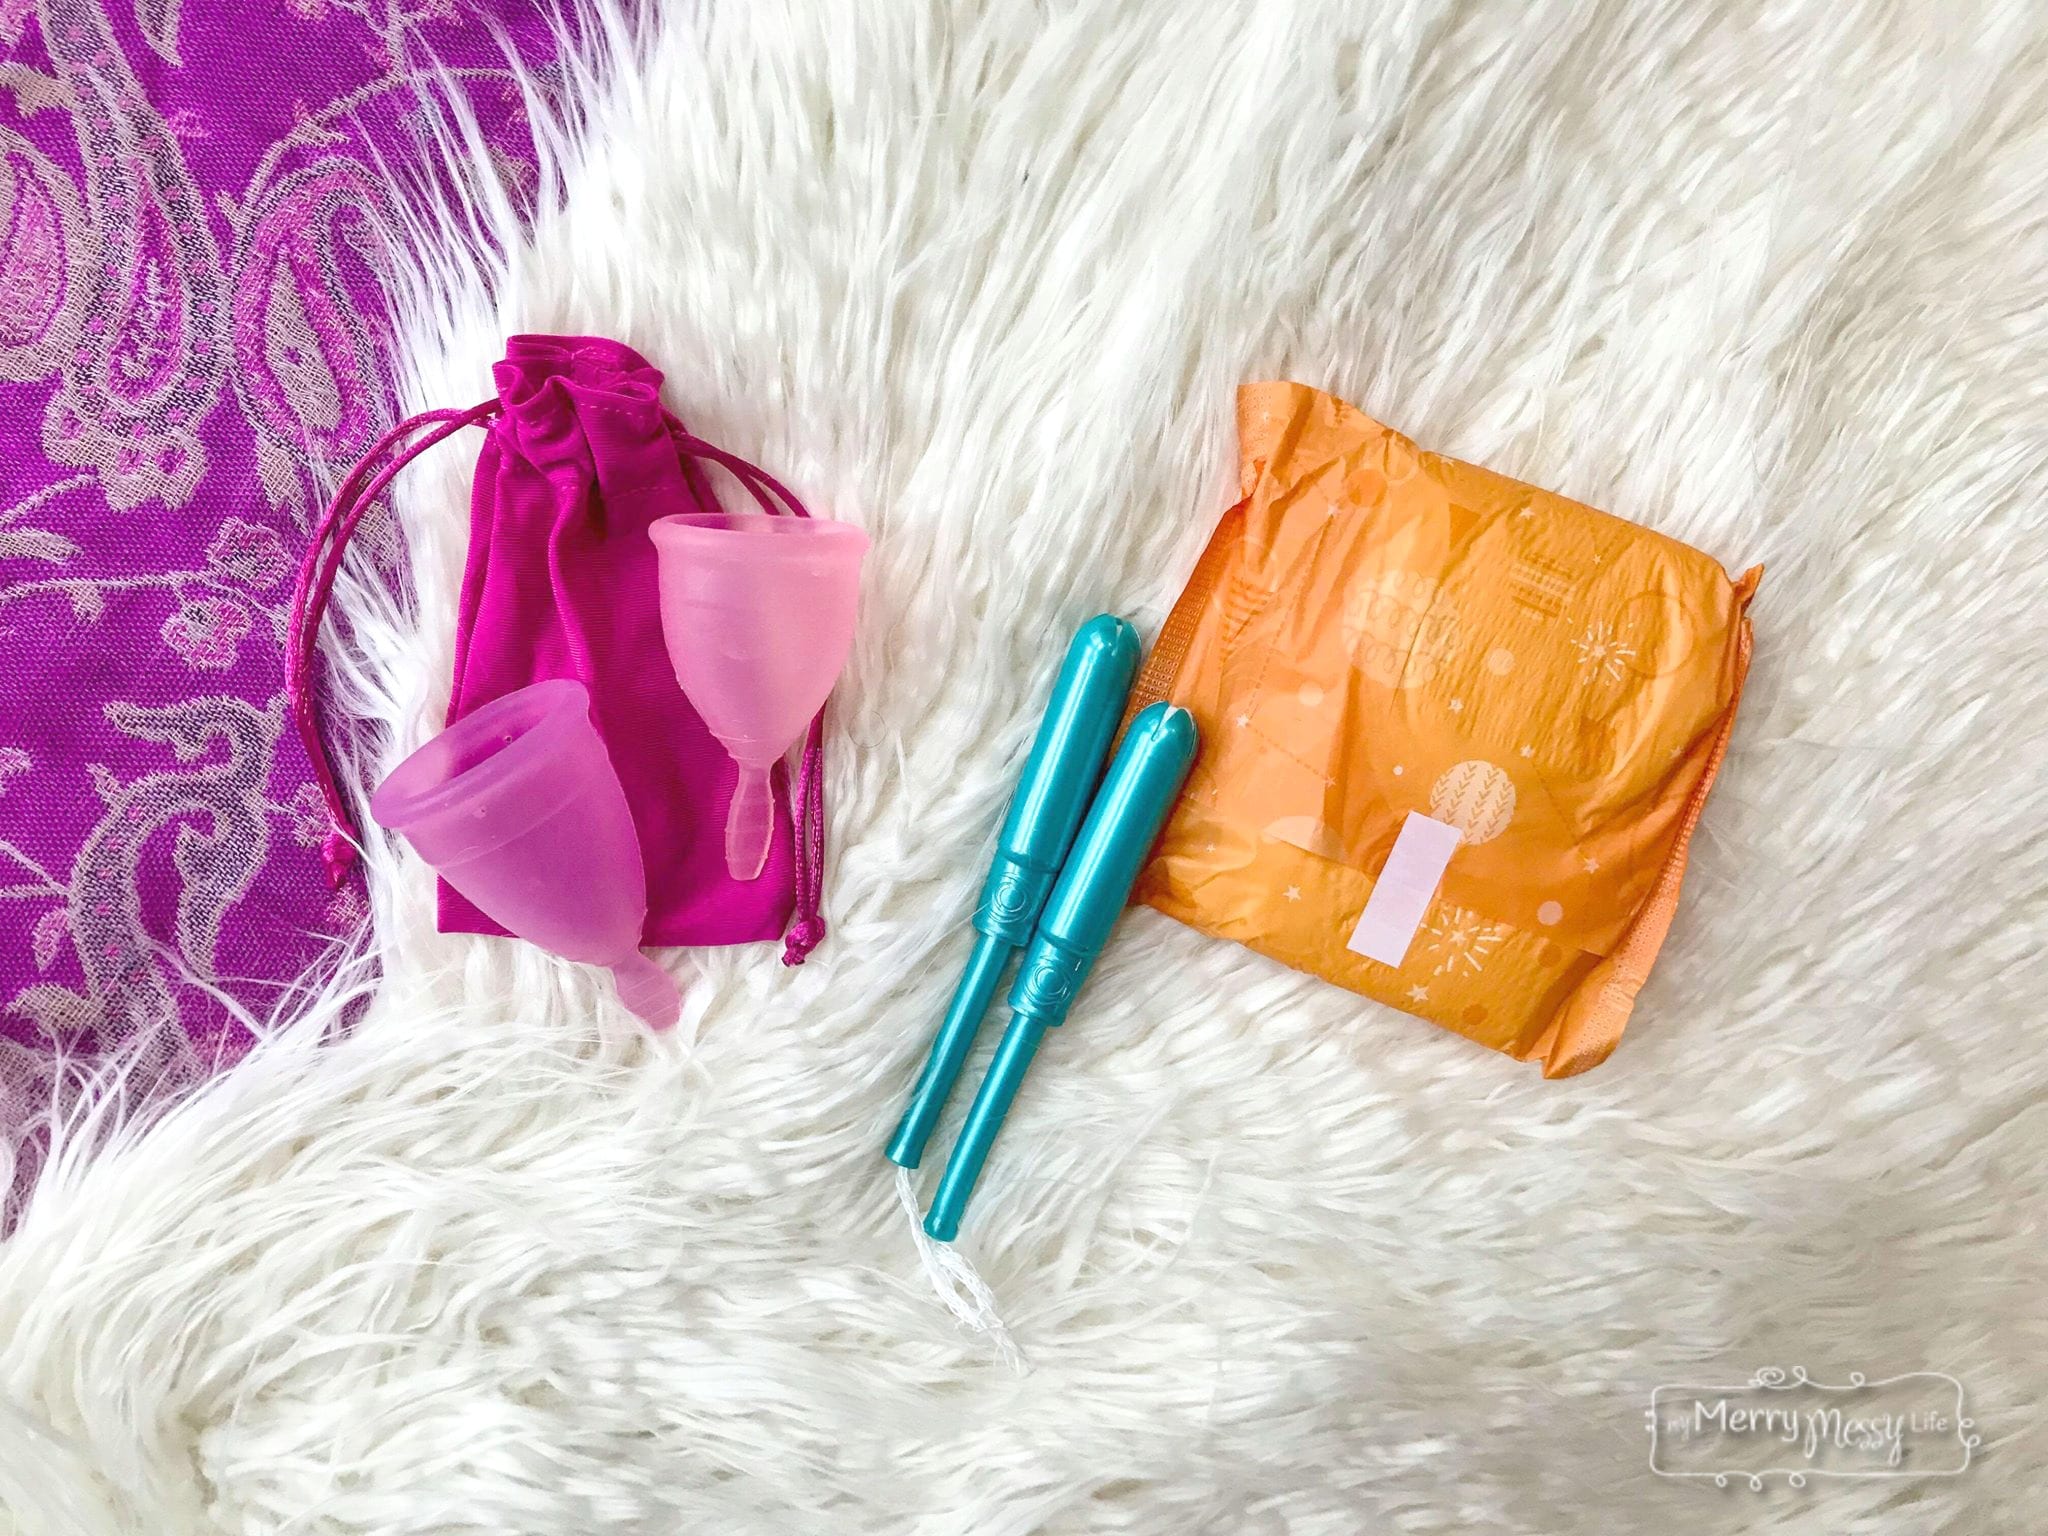 Ditch the pads and tampons for a menstrual cup!